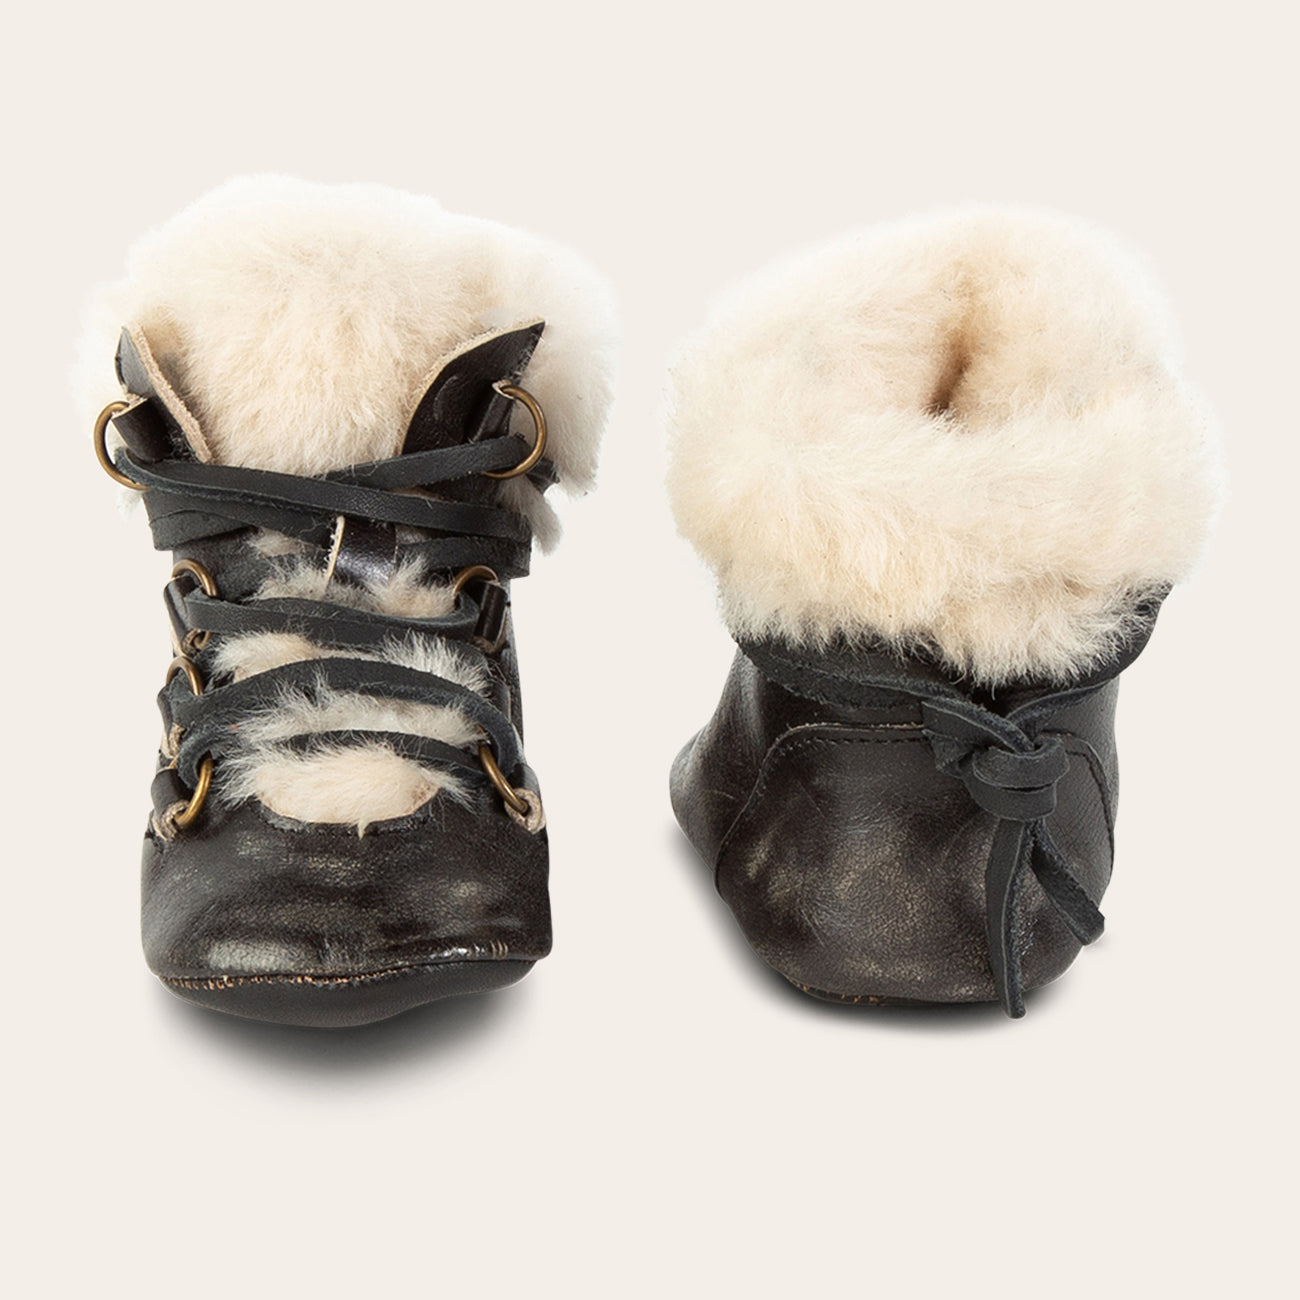 front and back view showing shearling lining and contrasting leather lace detailing on FREEBIRD infant baby Norway cognac leather bootie